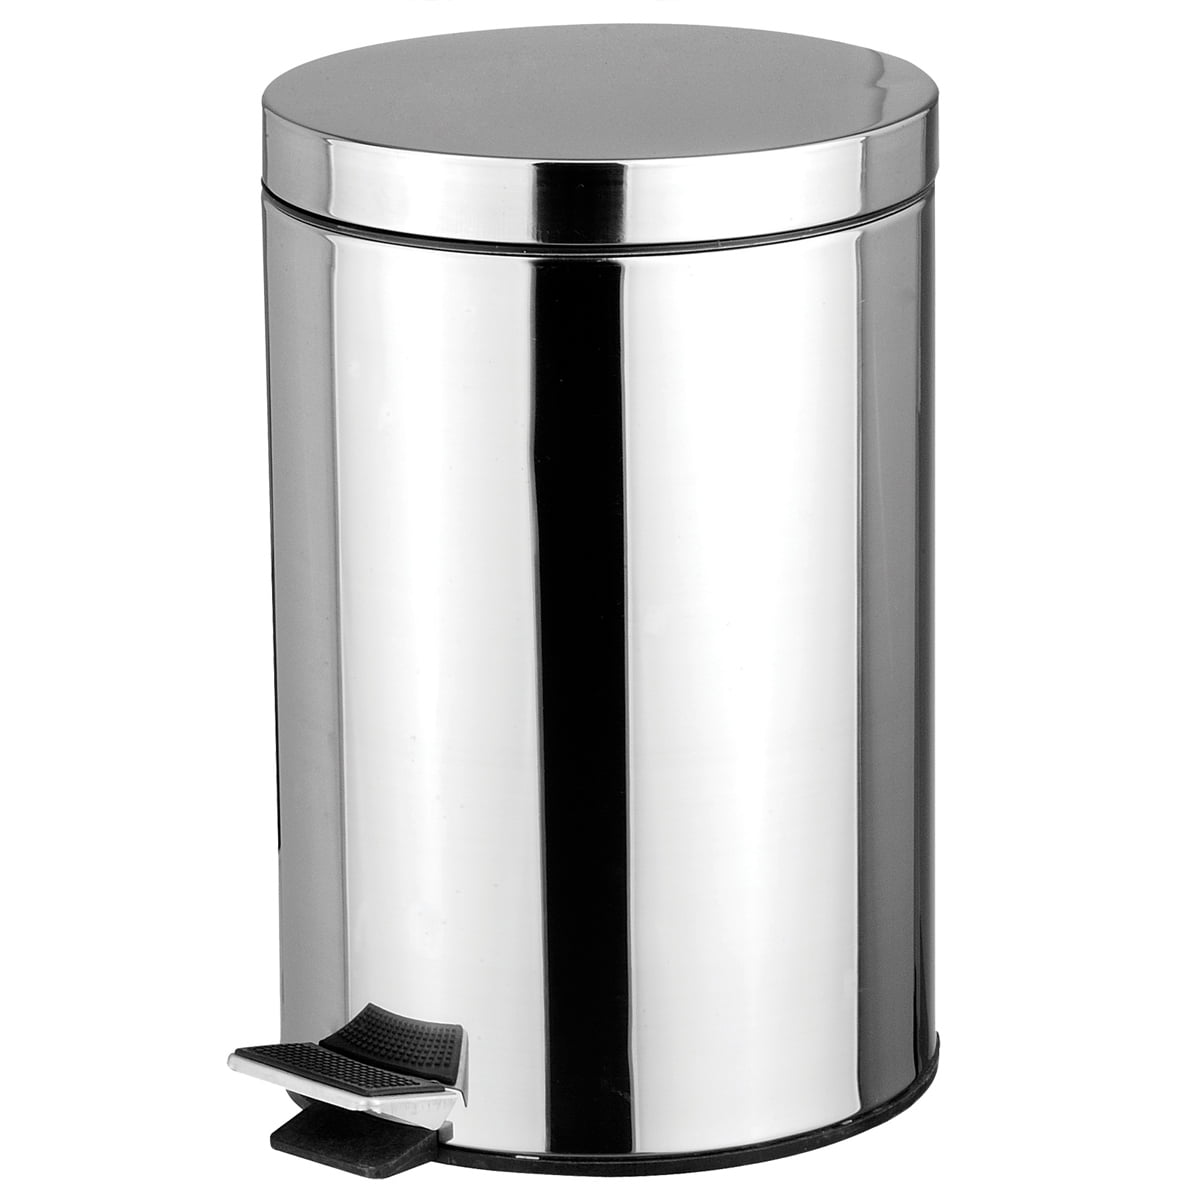 5L Stainless Steel Foot Pedal Metal Trash Can/Bin with Lid 